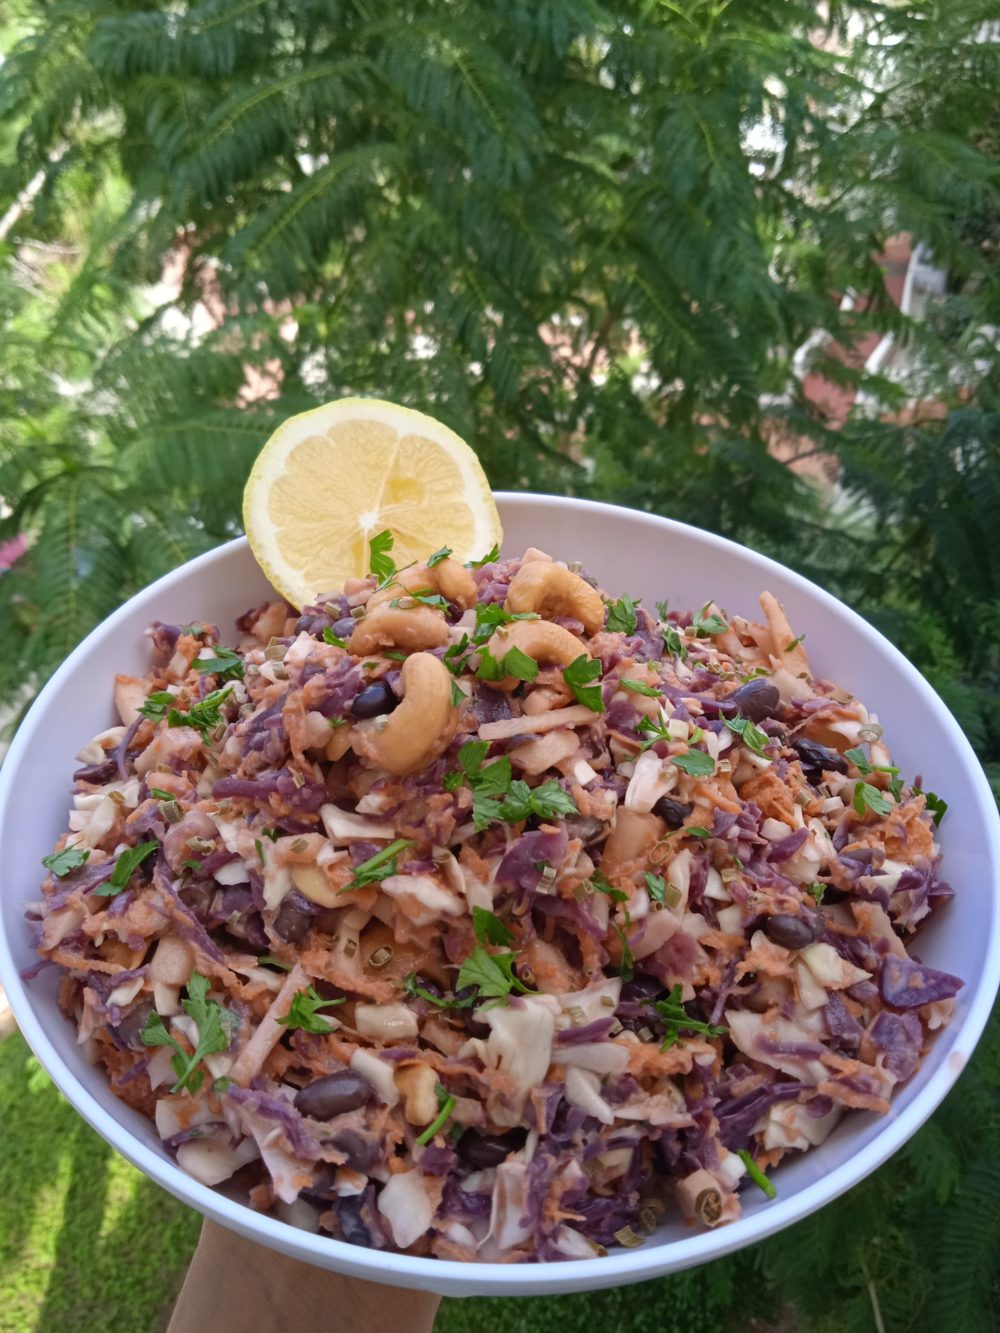 vegan coleslaw in a white bowl with evergreen trees in the background